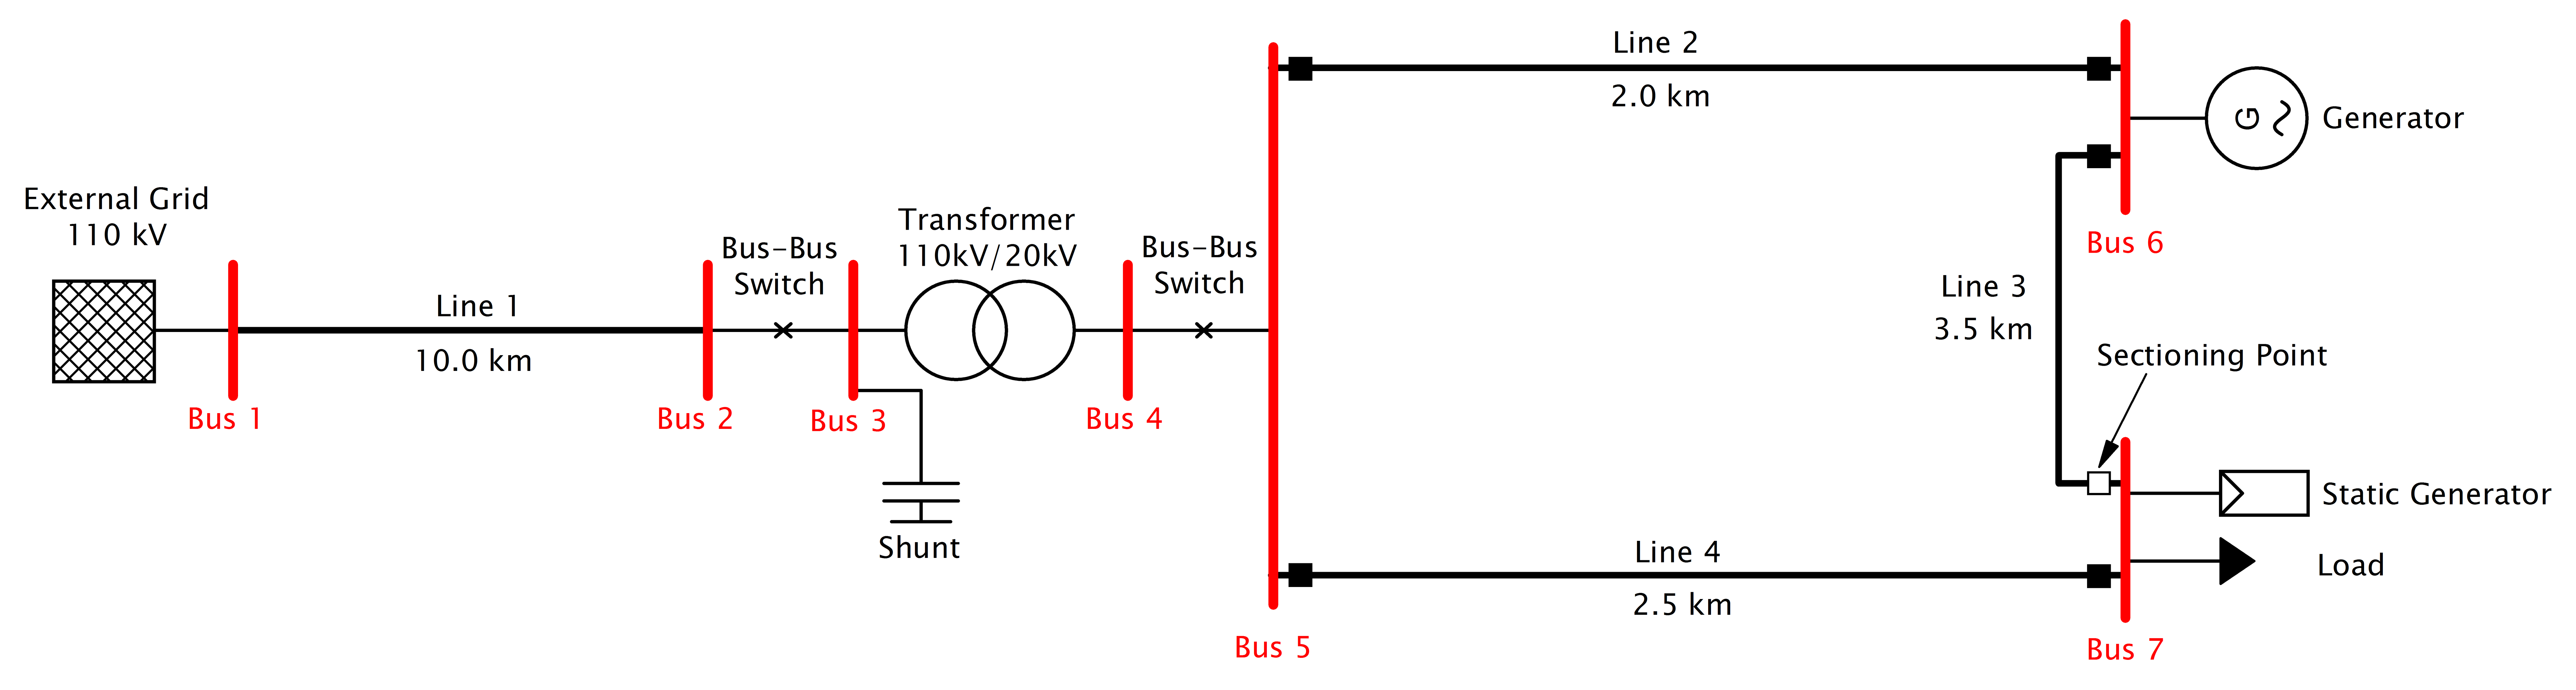 example_network_simple_buses.png